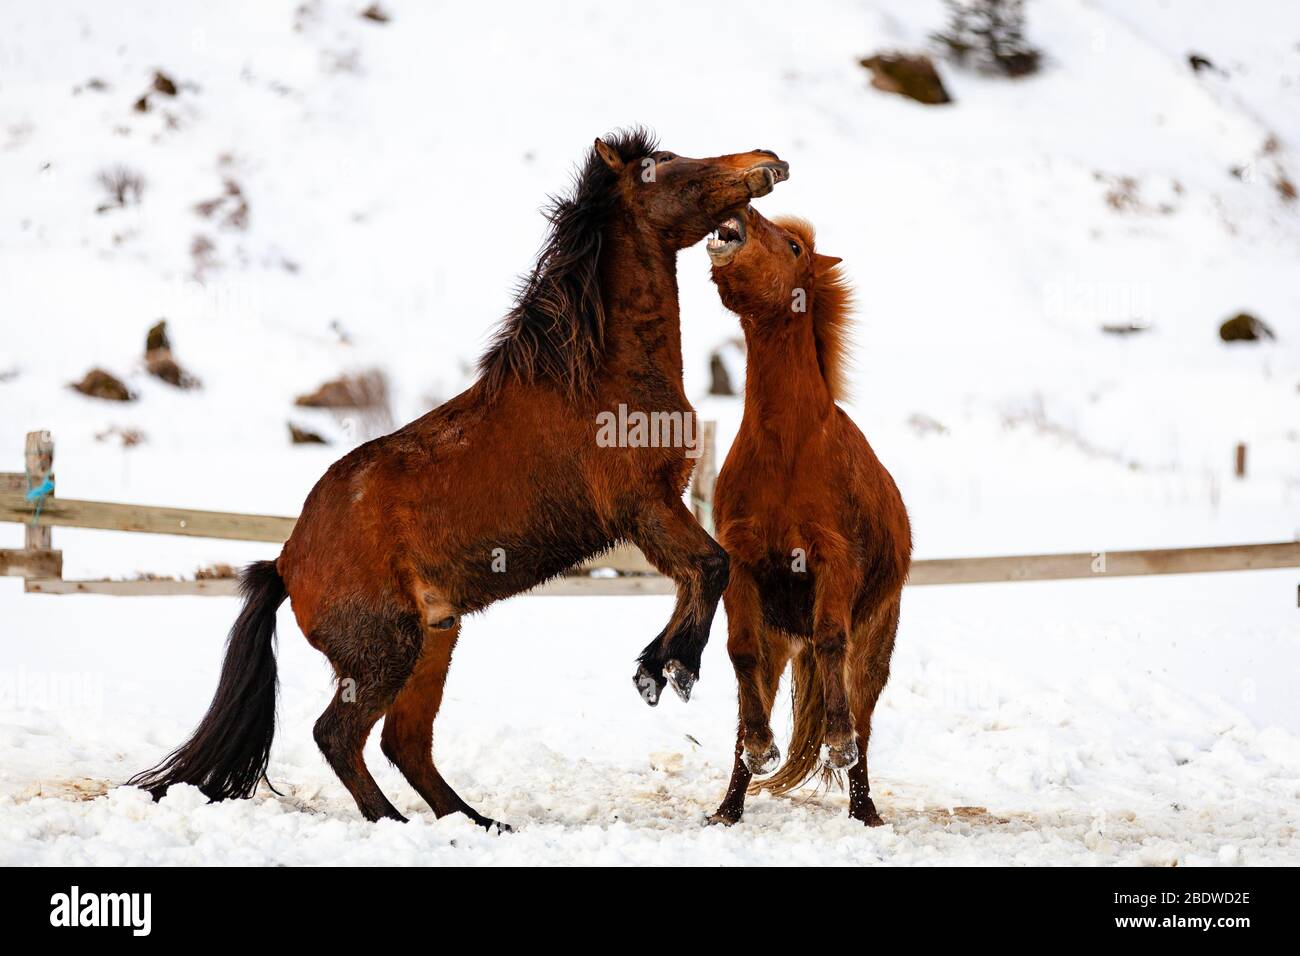 Icelandic horses (Equus ferus caballus) fighting or playing in the snow at reynisfjara, Iceland Stock Photo